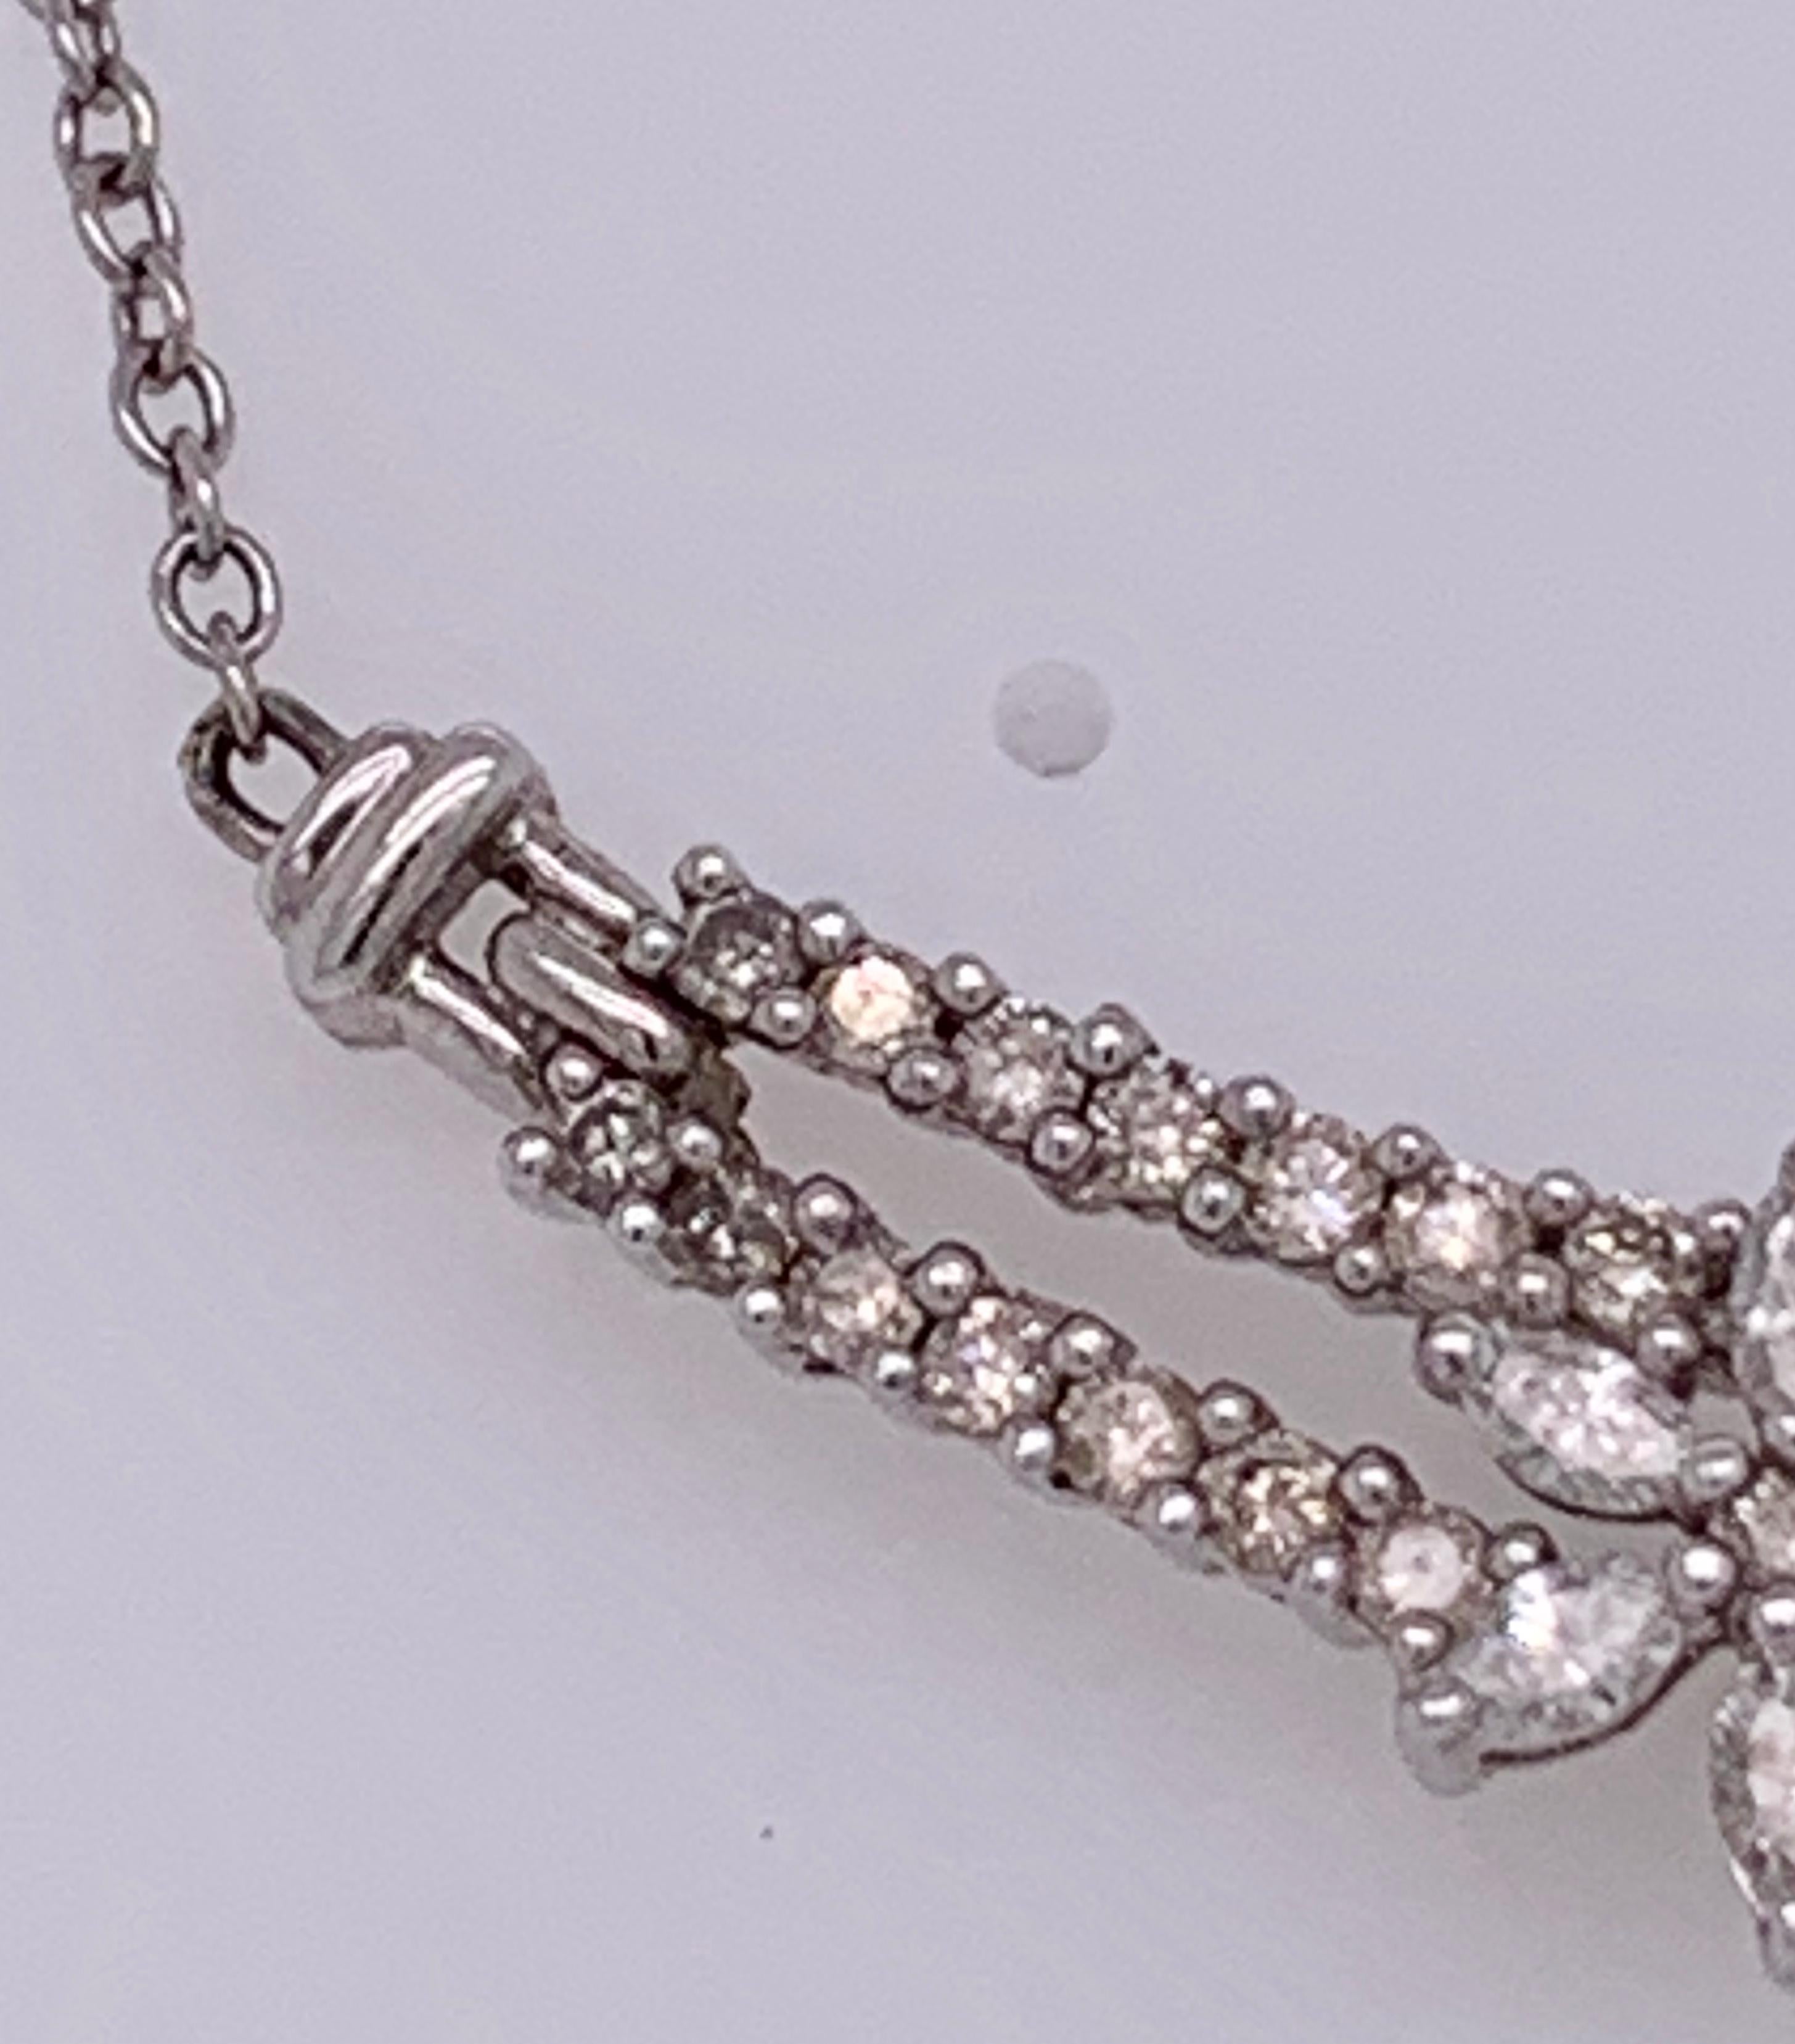 18 Karat White Gold And Diamond Soldered Pendent Necklace For Sale 2